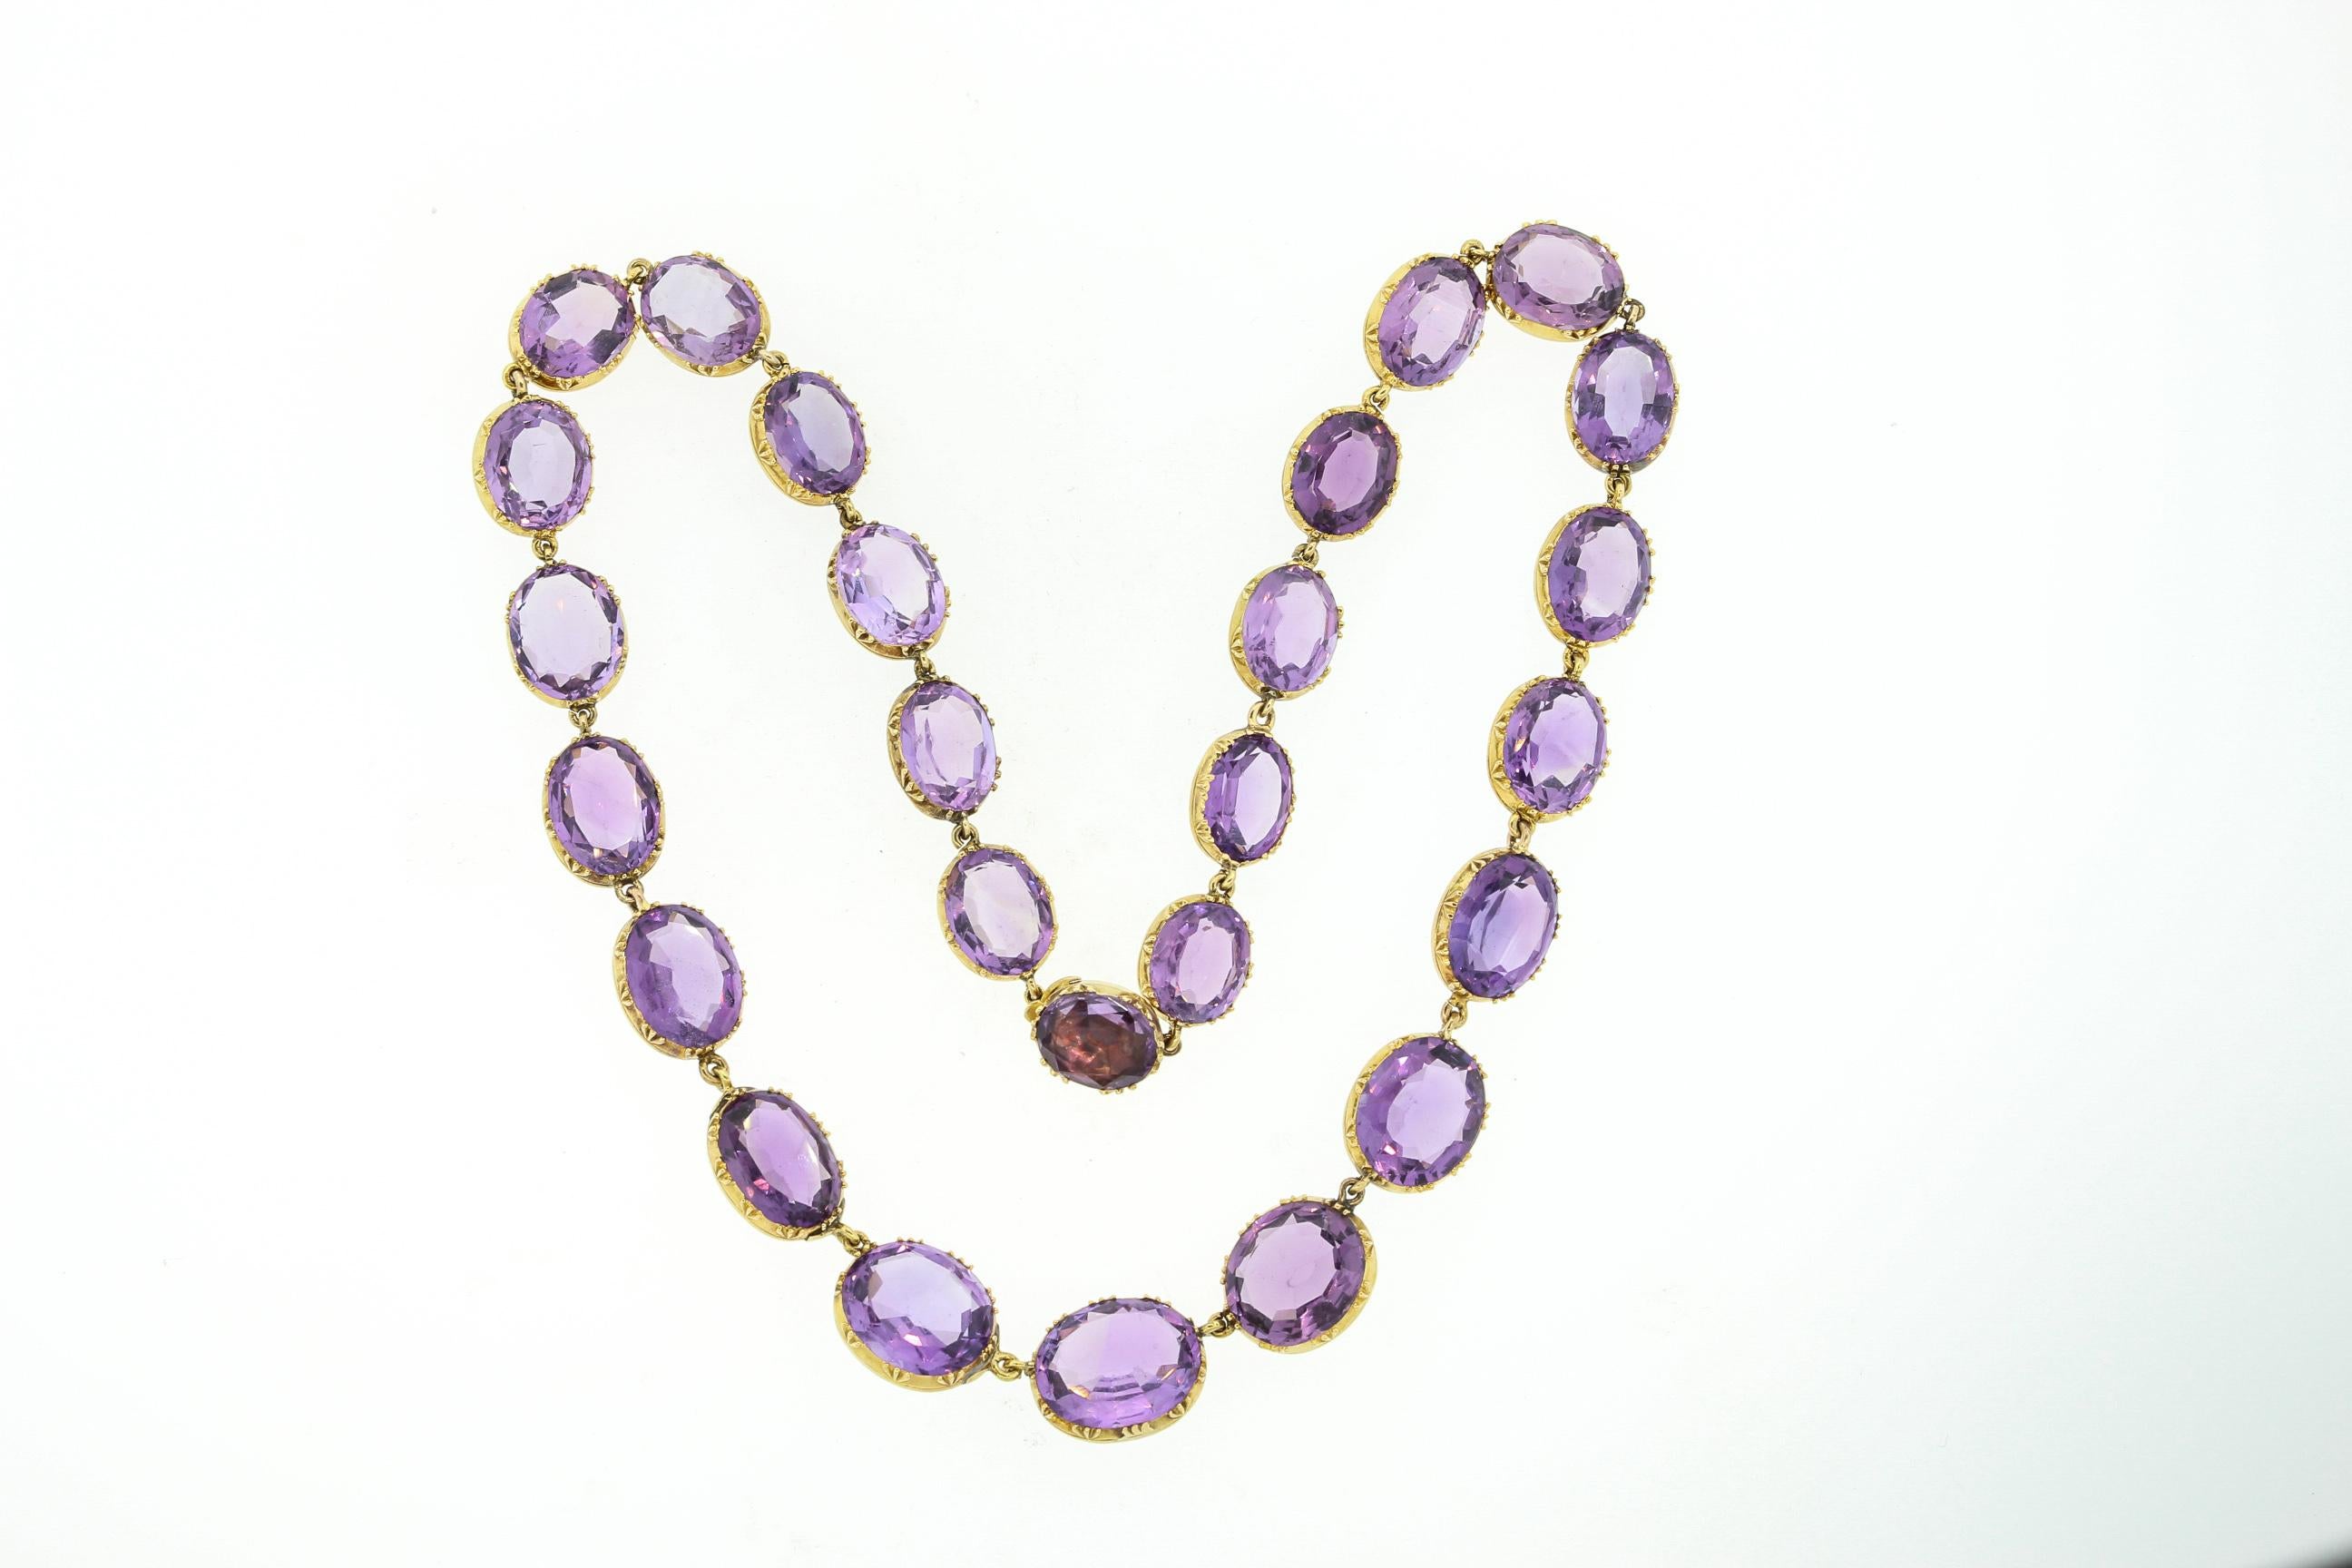 Antique Late Victorian Gold Amethyst Riviere Necklace 1